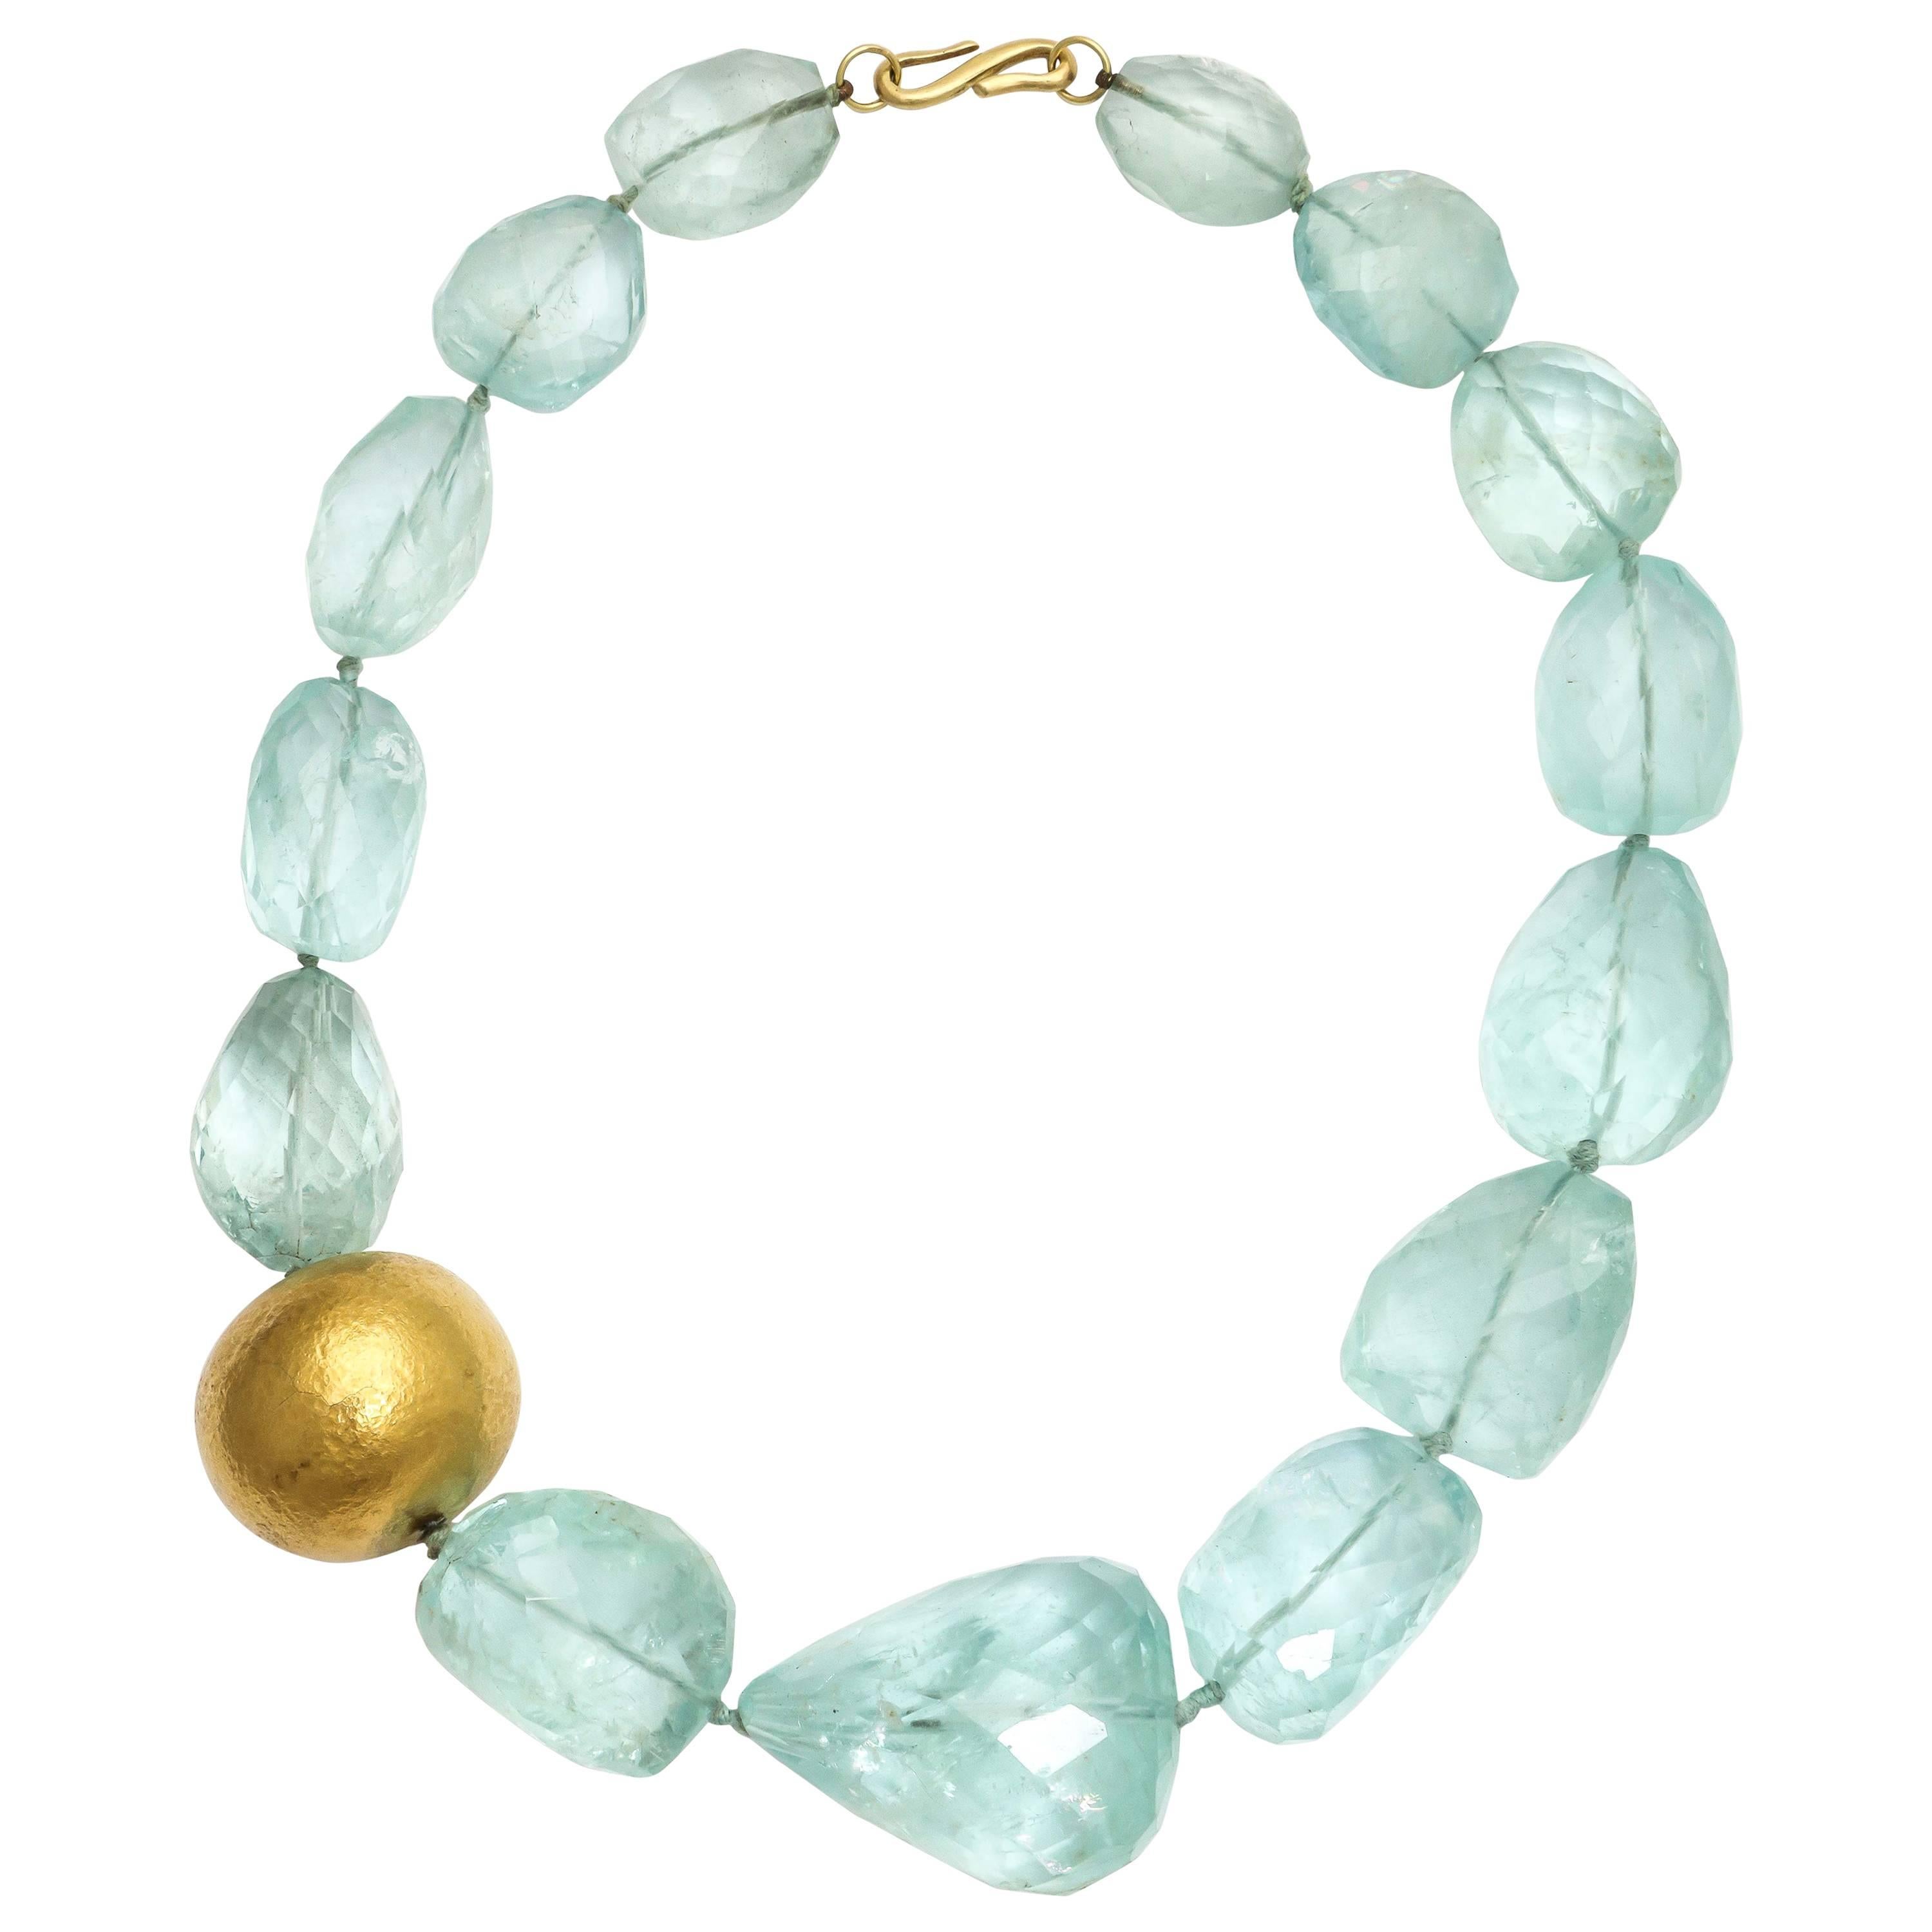 Faceted Aquamarine Hand Hammered Gold Bead Necklace